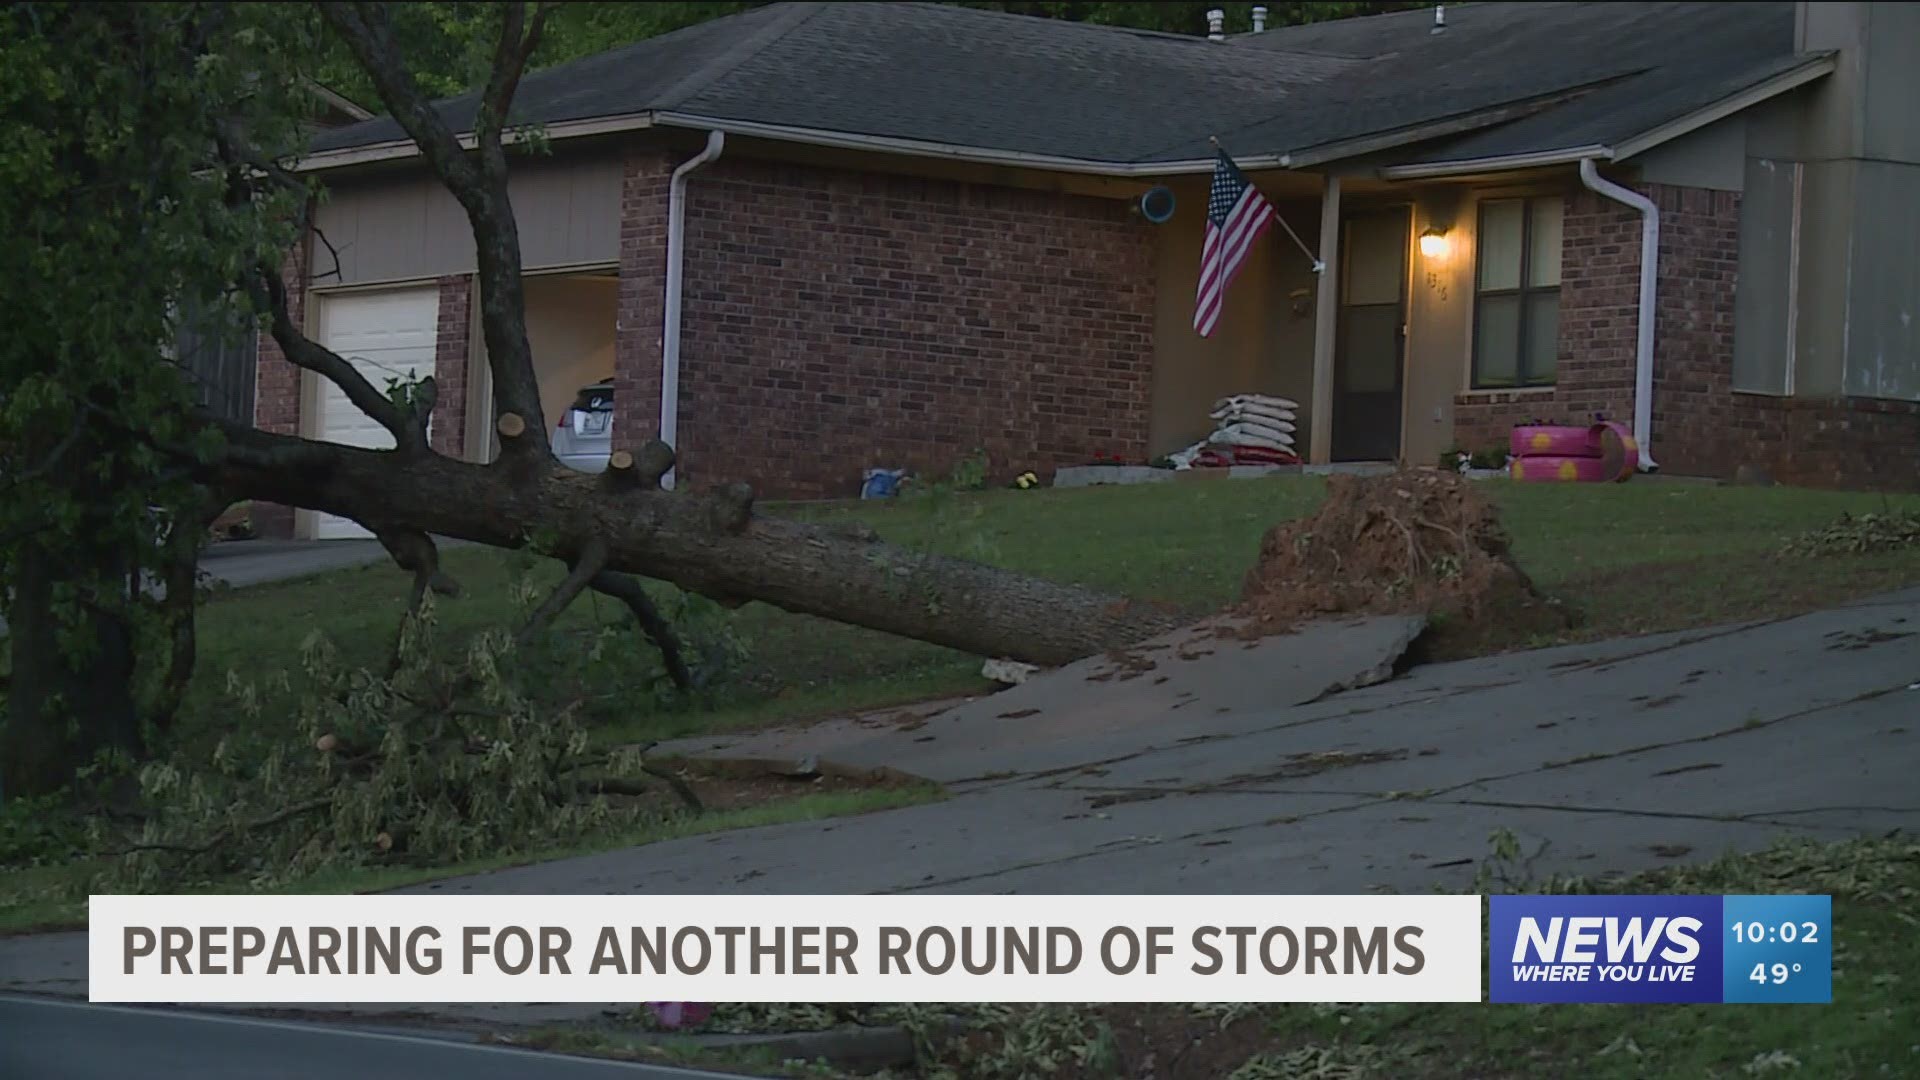 River Valley residents who have a lot of debris in their yards from the storms can call 211 for assistance.